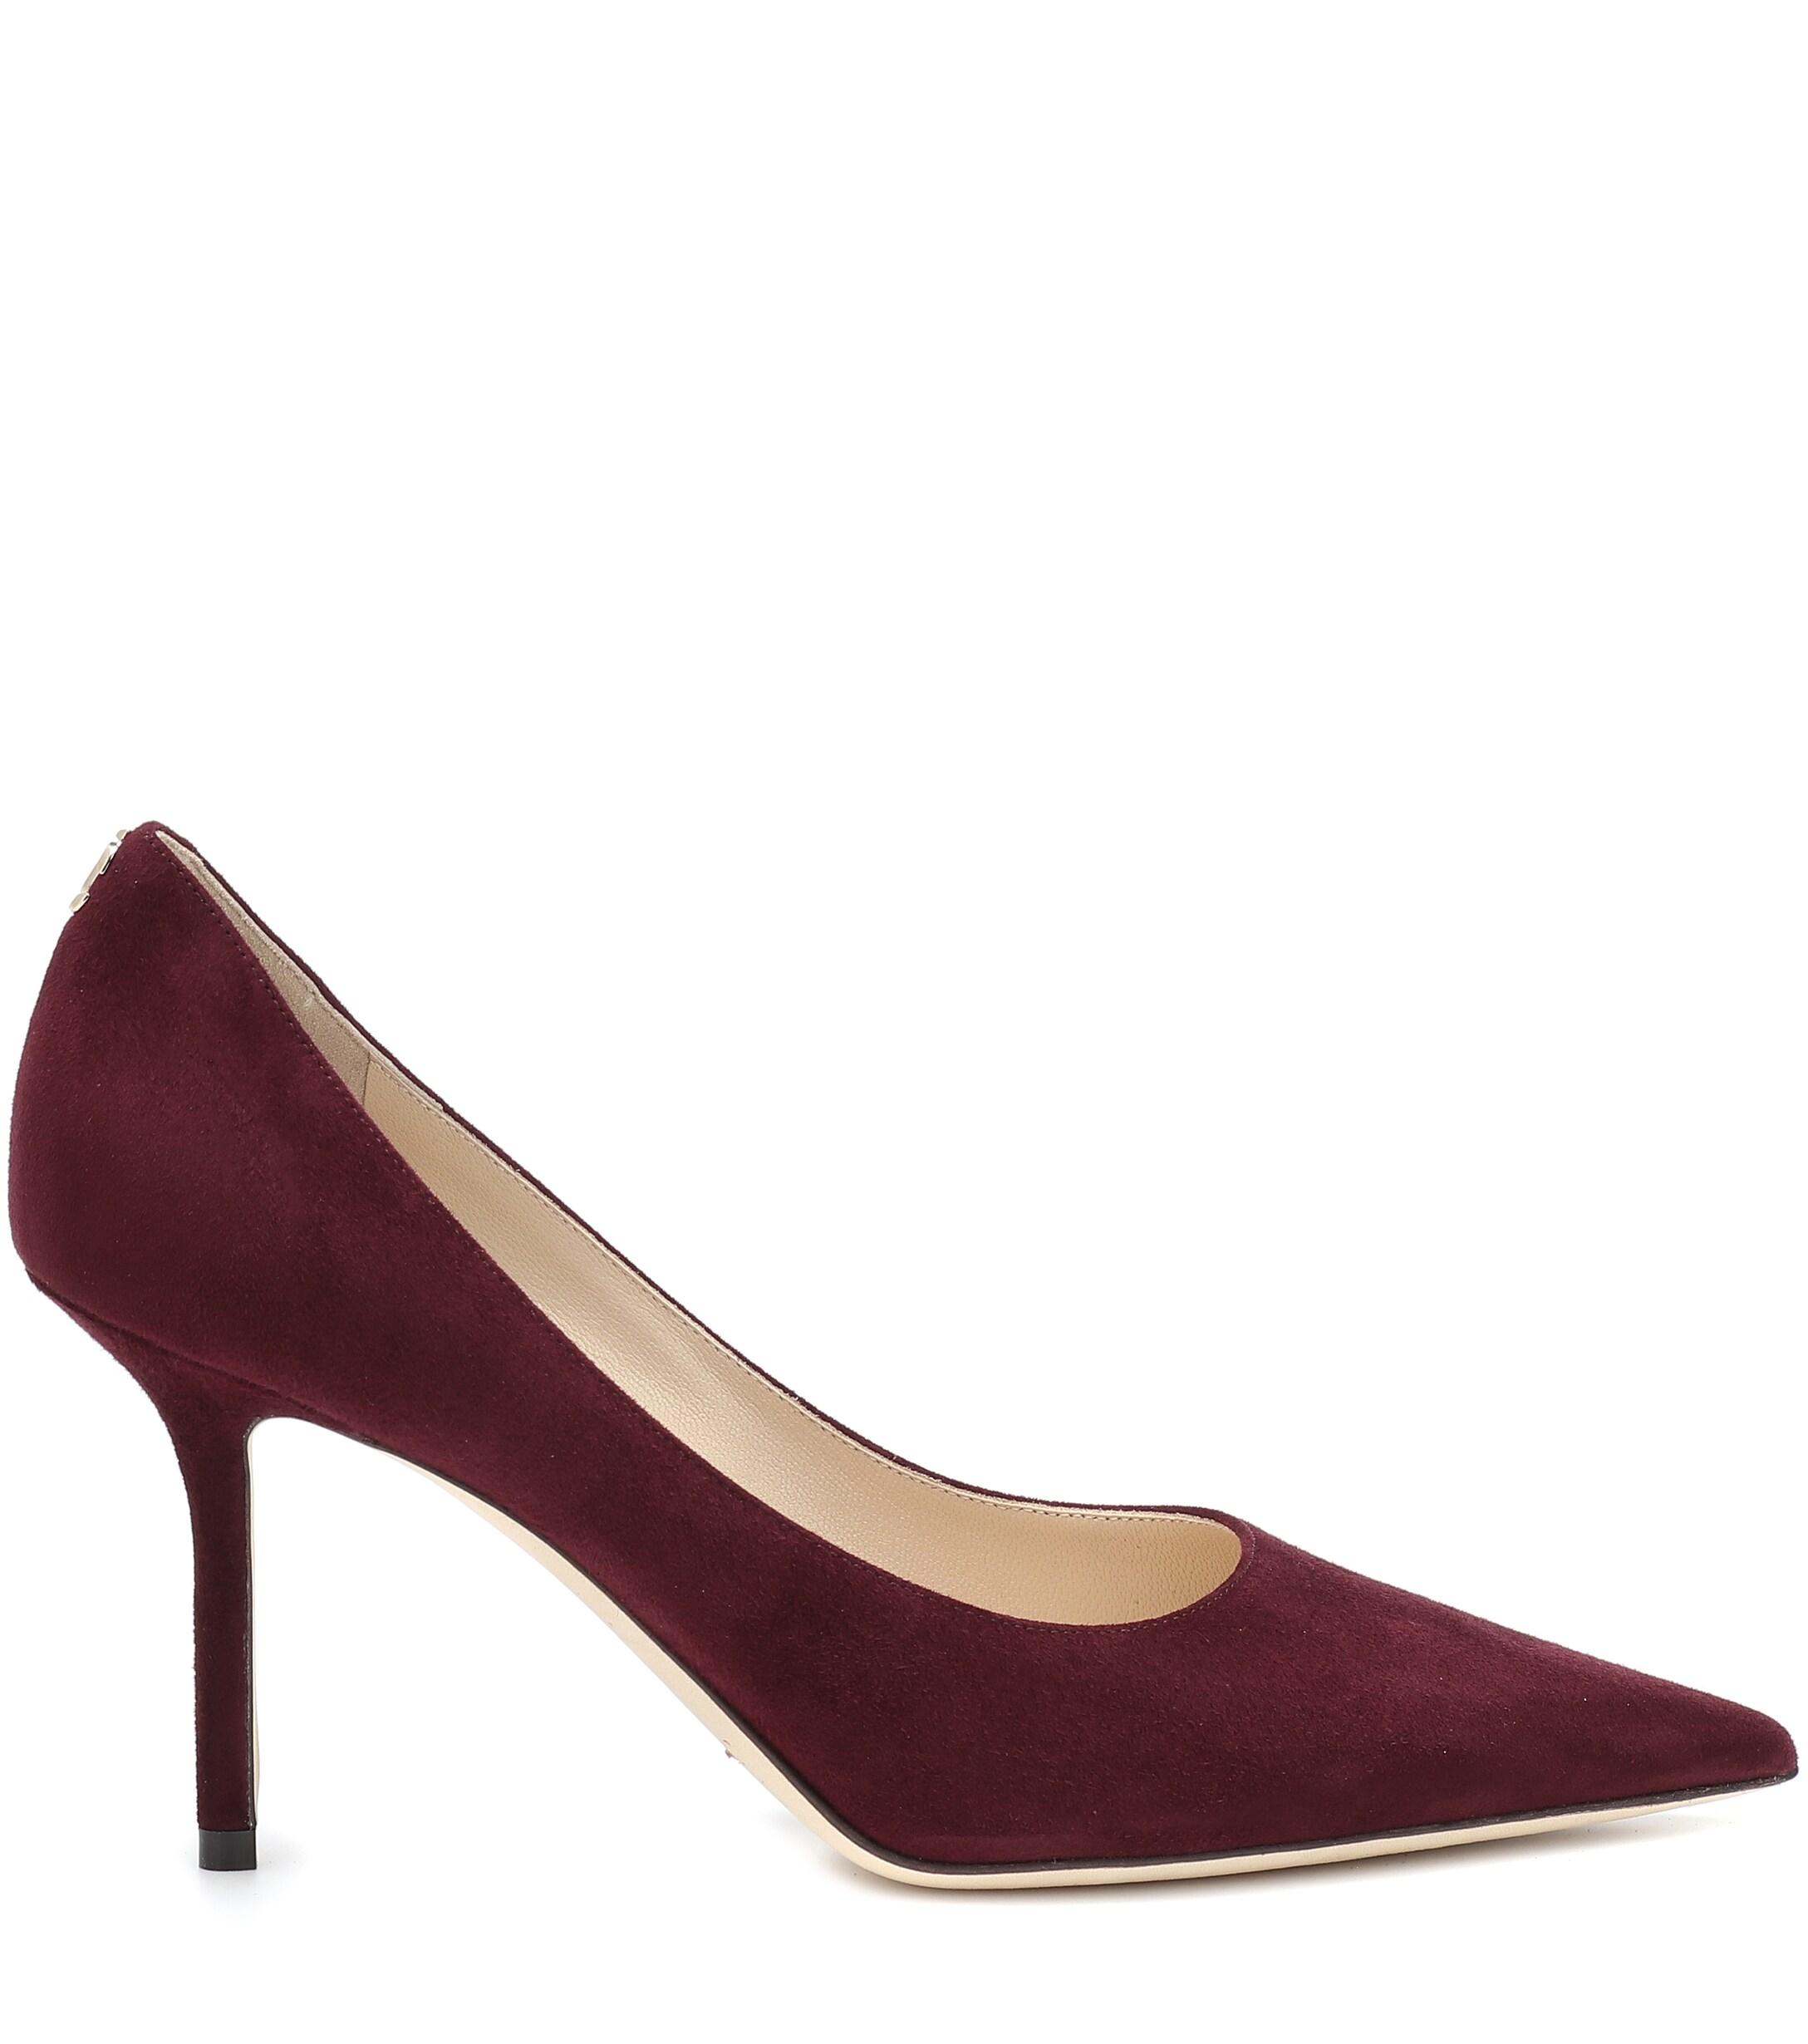 Jimmy Choo Love 85 Suede Pumps in Red - Save 6% - Lyst